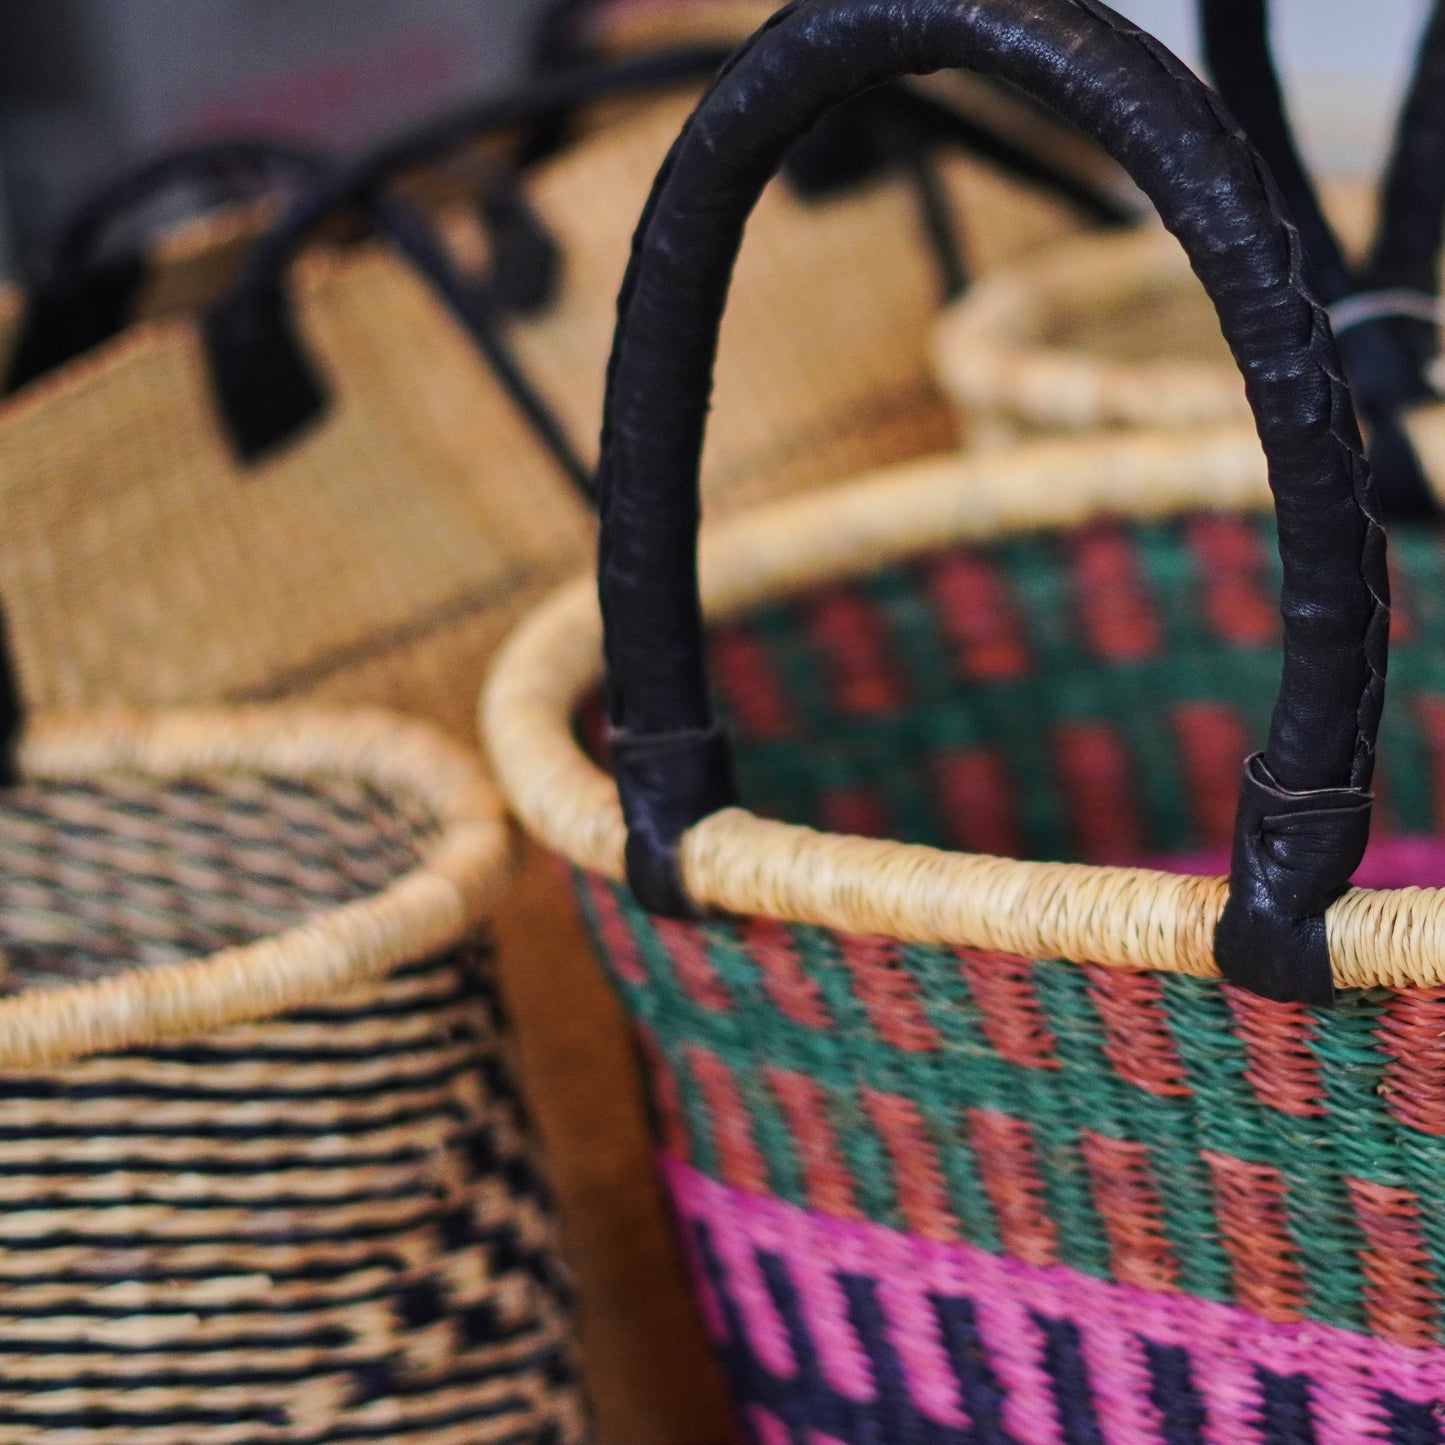 Shopping basket woven in sustainable sea grass. Three colors and Fair Trade from Ghana